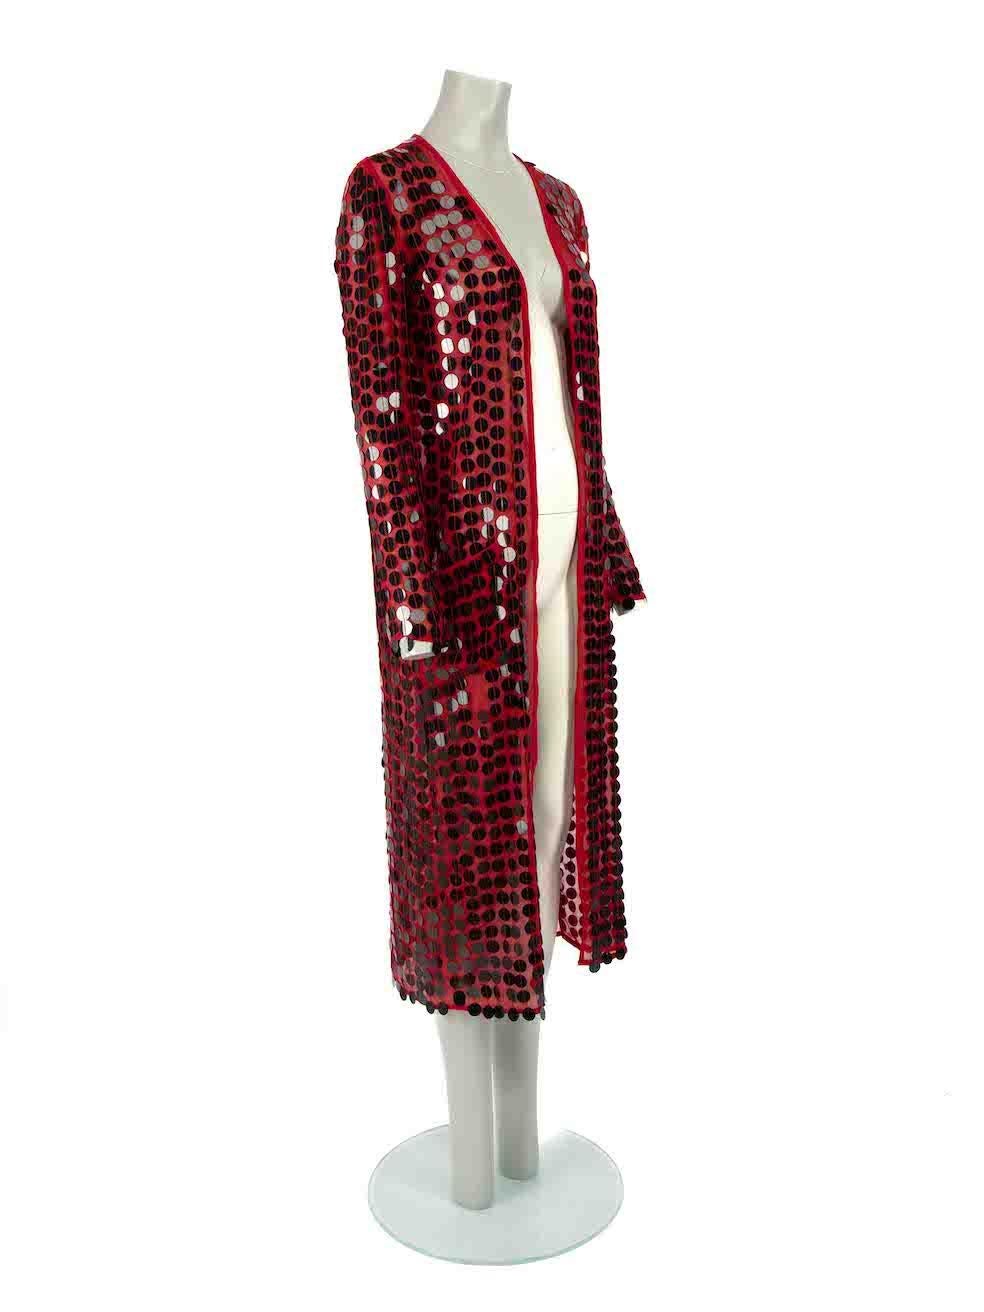 CONDITION is Good. Minor wear to jacket is evident. Light wear to the embellishment with multiple missing sequins on this used House Of Harlow 1960 x Revolve designer resale item.
 
 Details
 Red
 Polyester
 Jacket
 Black sequin embellished
 Long